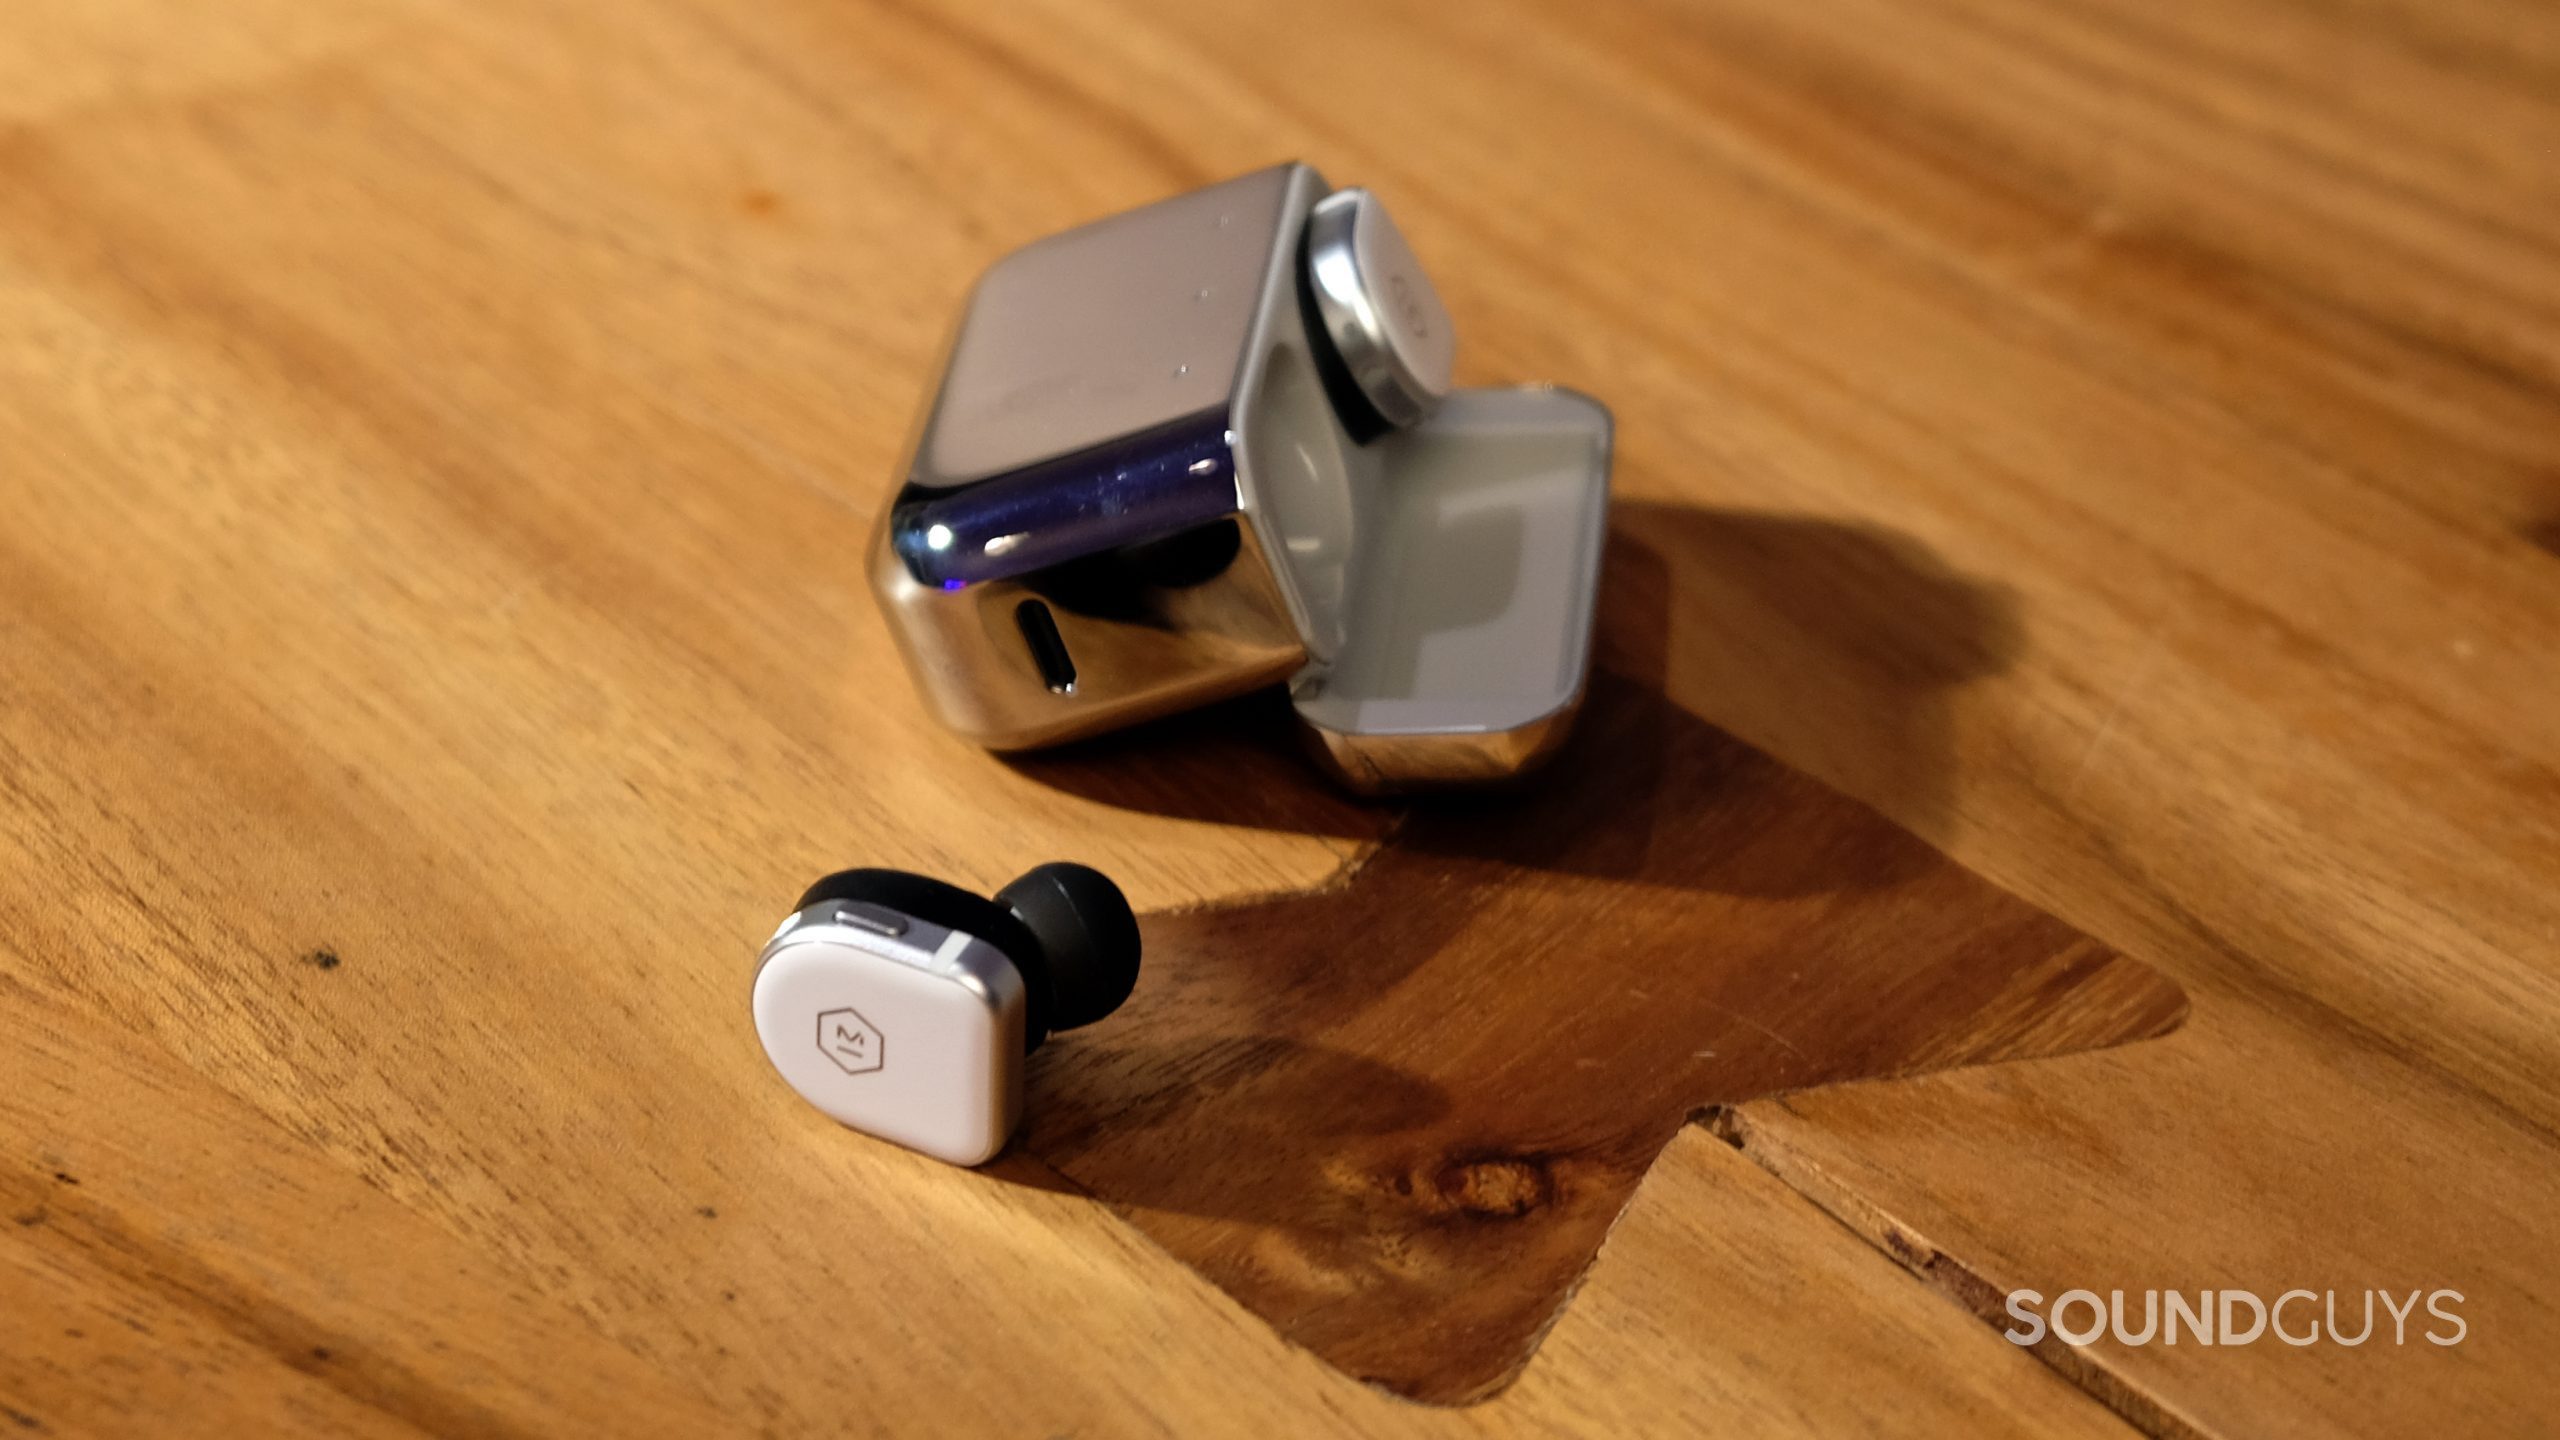 Sitting on a table there is a single master &amp; dynamic mw08 earbud, with the other in its case.